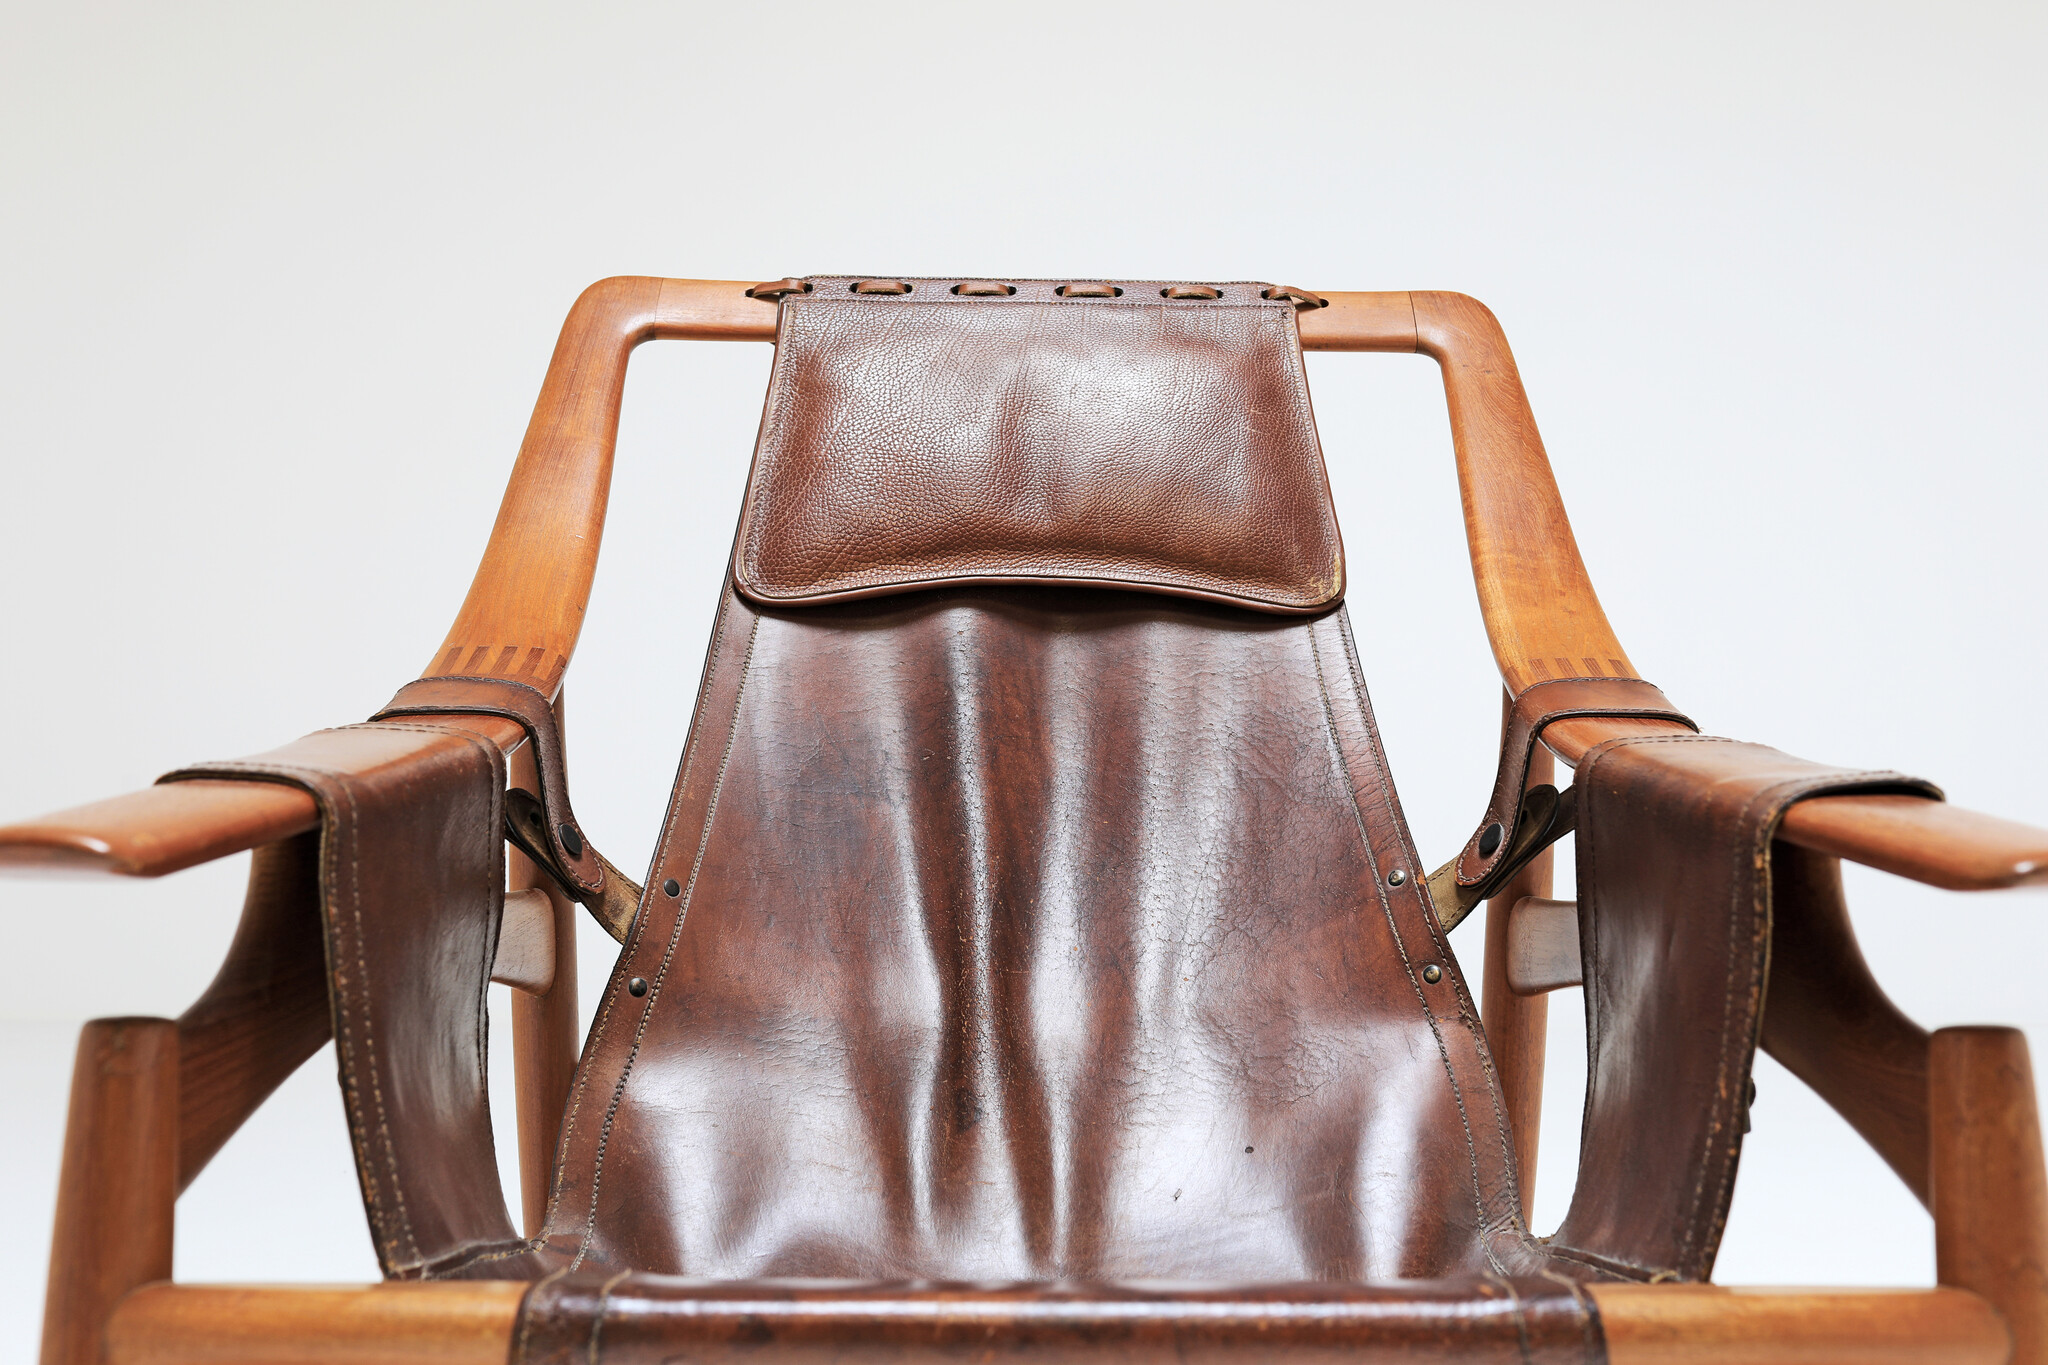 Leather chair from Liceu de Artes e Ofícios from the 1960s